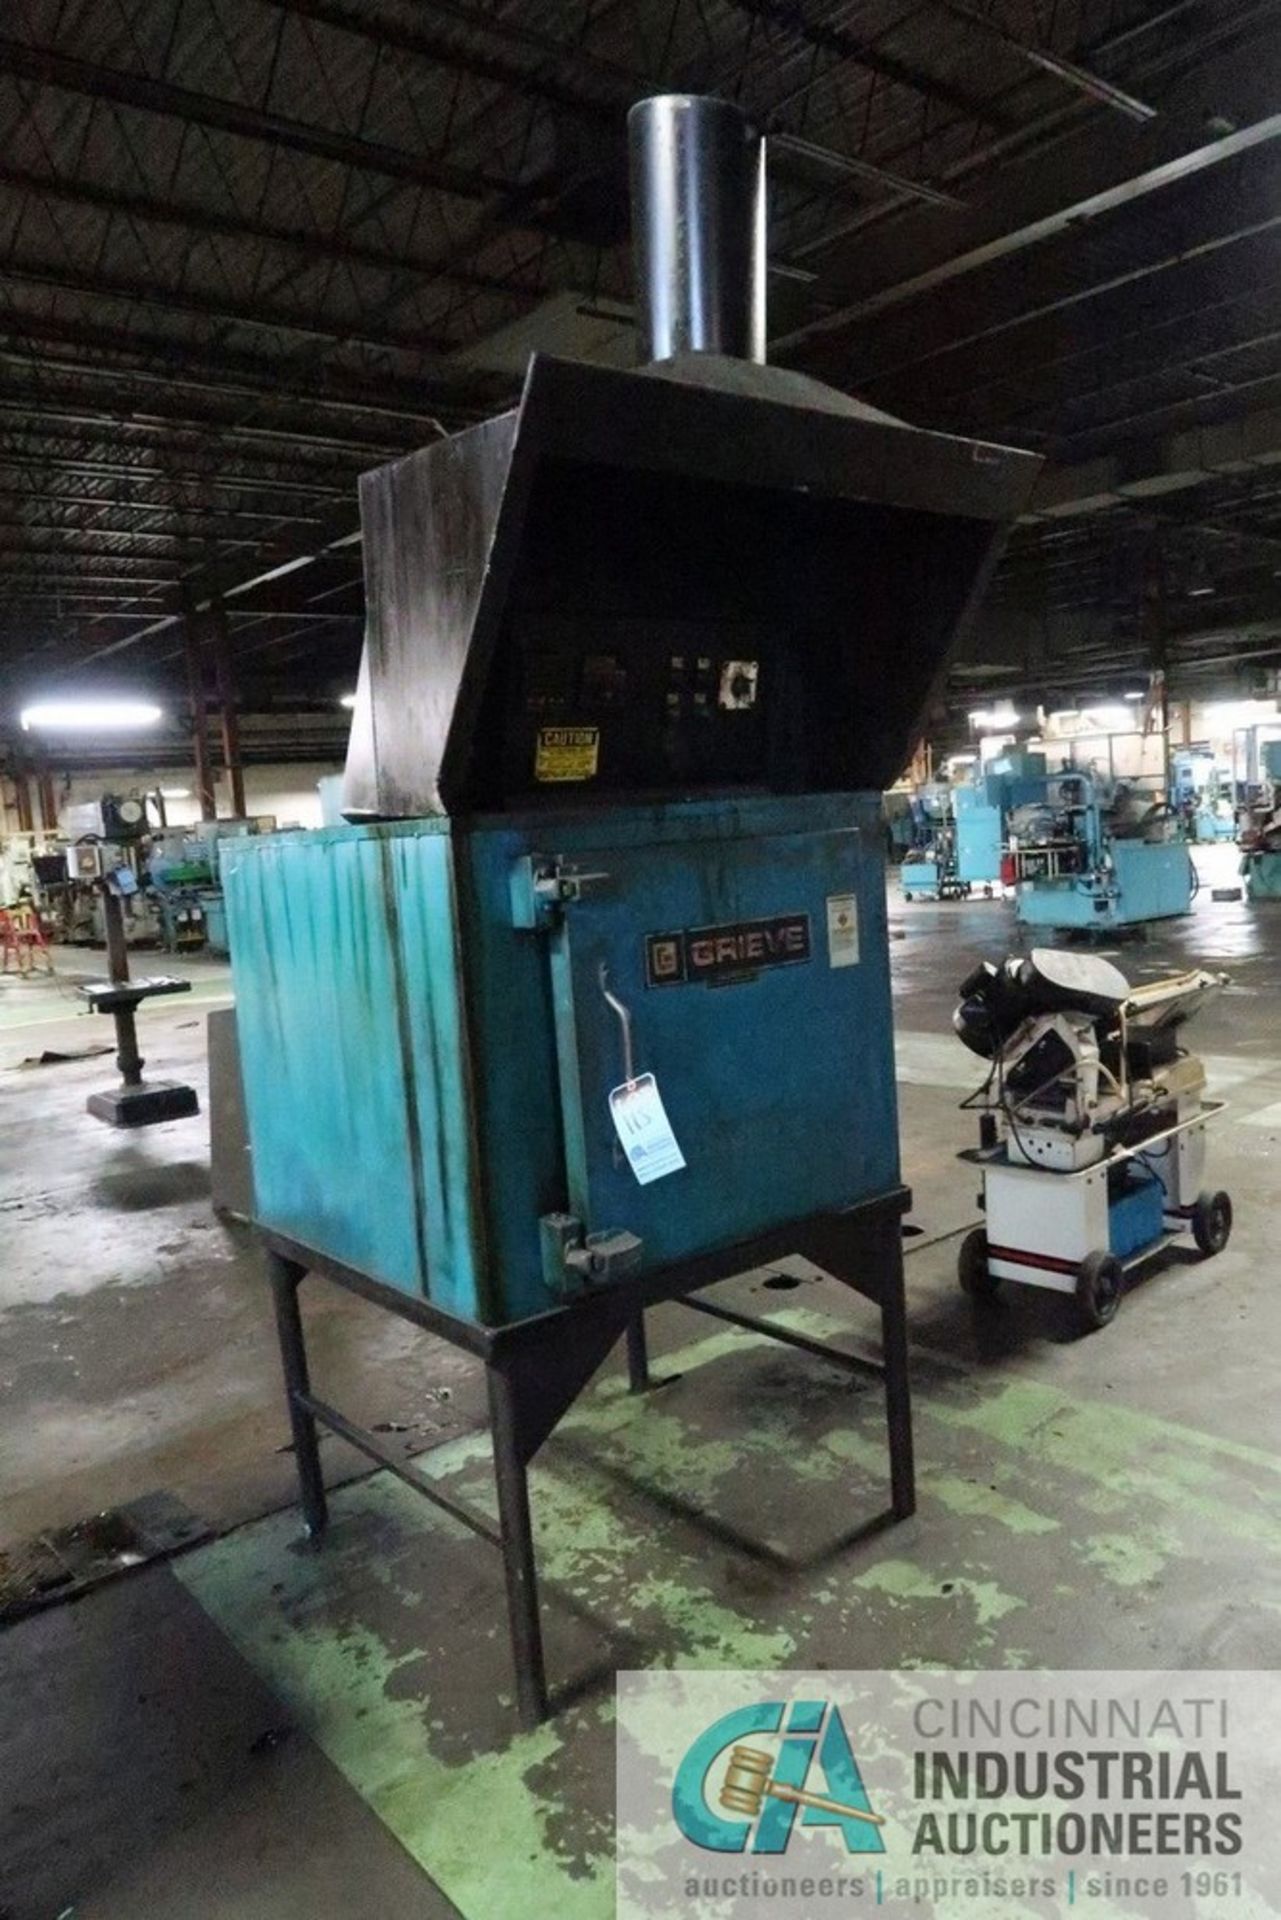 GRIEVE MODEL AA-500 OVEN; S/N 330366, 28" X 26" X 24" INTERIOR DIMENSIONS, 500 DEGREE FARENHEIT - Image 2 of 9